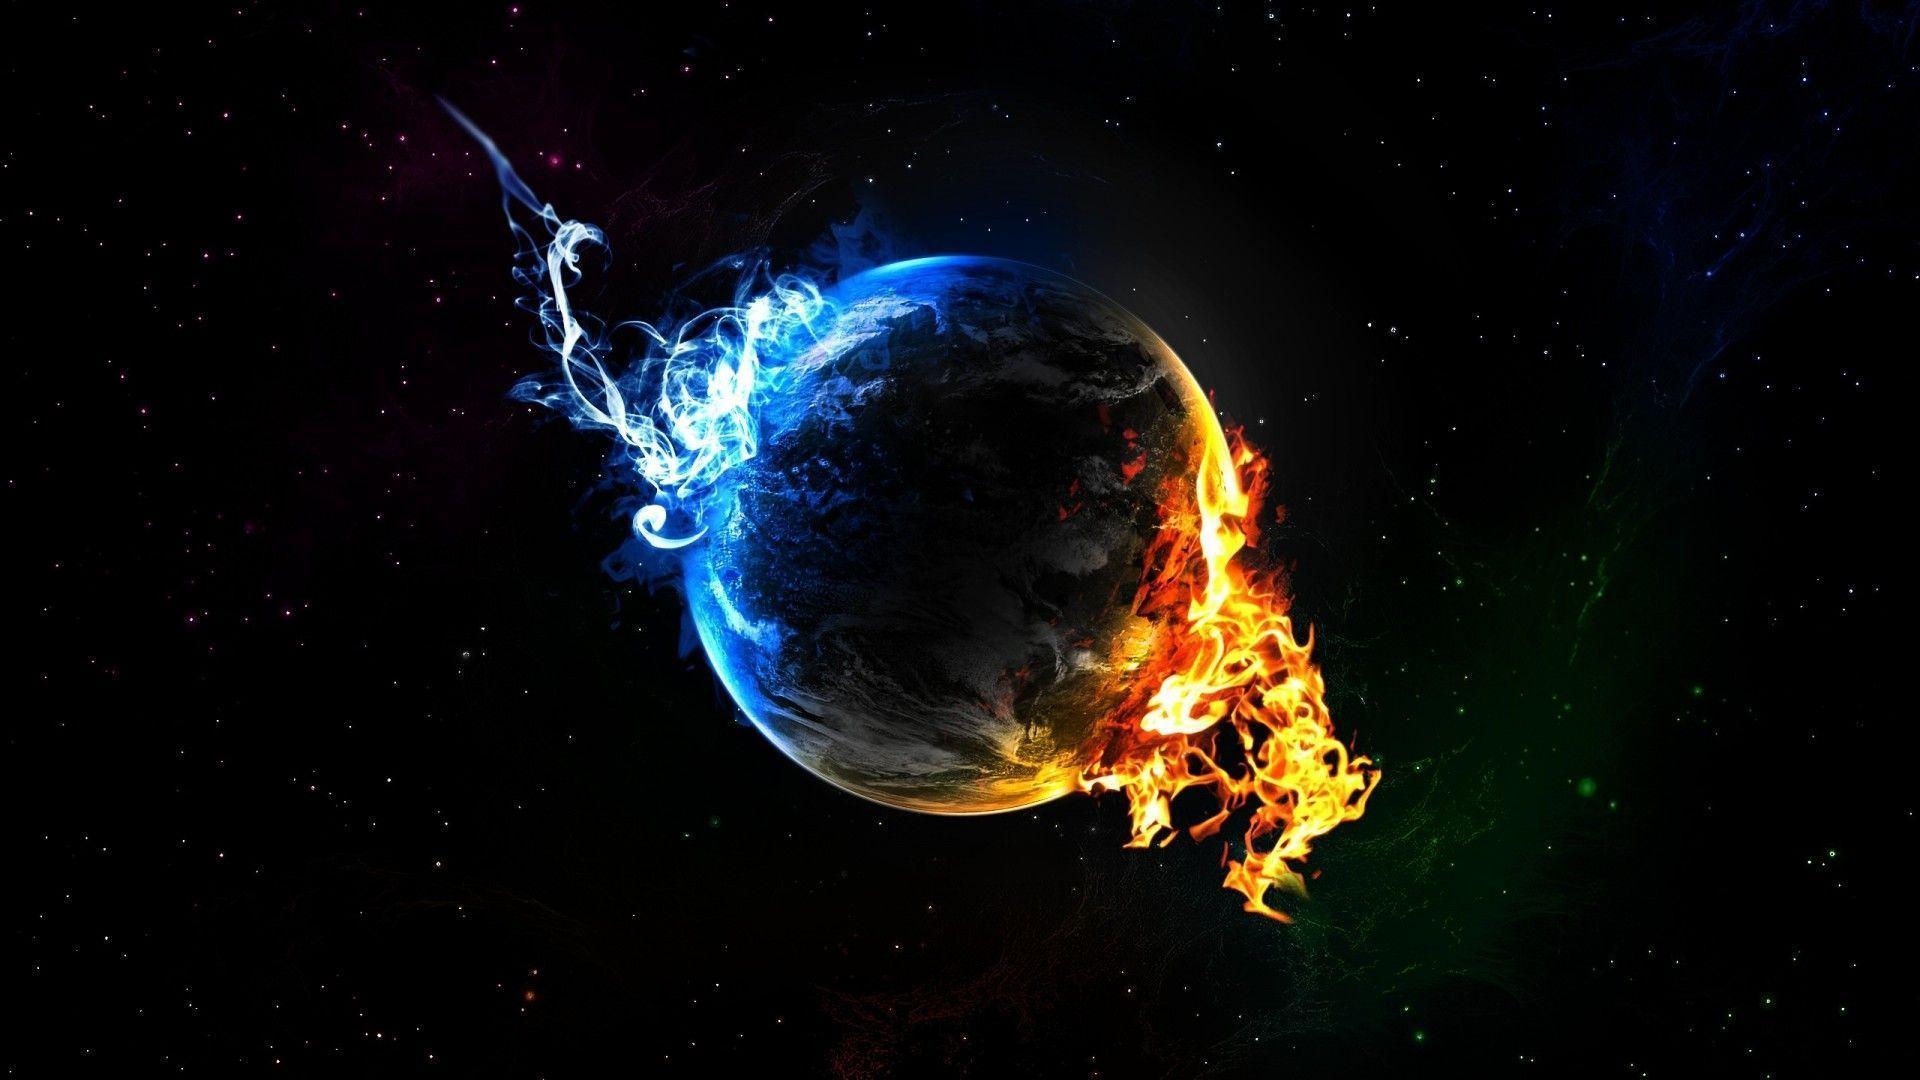 Earth Two Side Cool & Hot Wallpaper, iPhone Wallpaper, Facebook